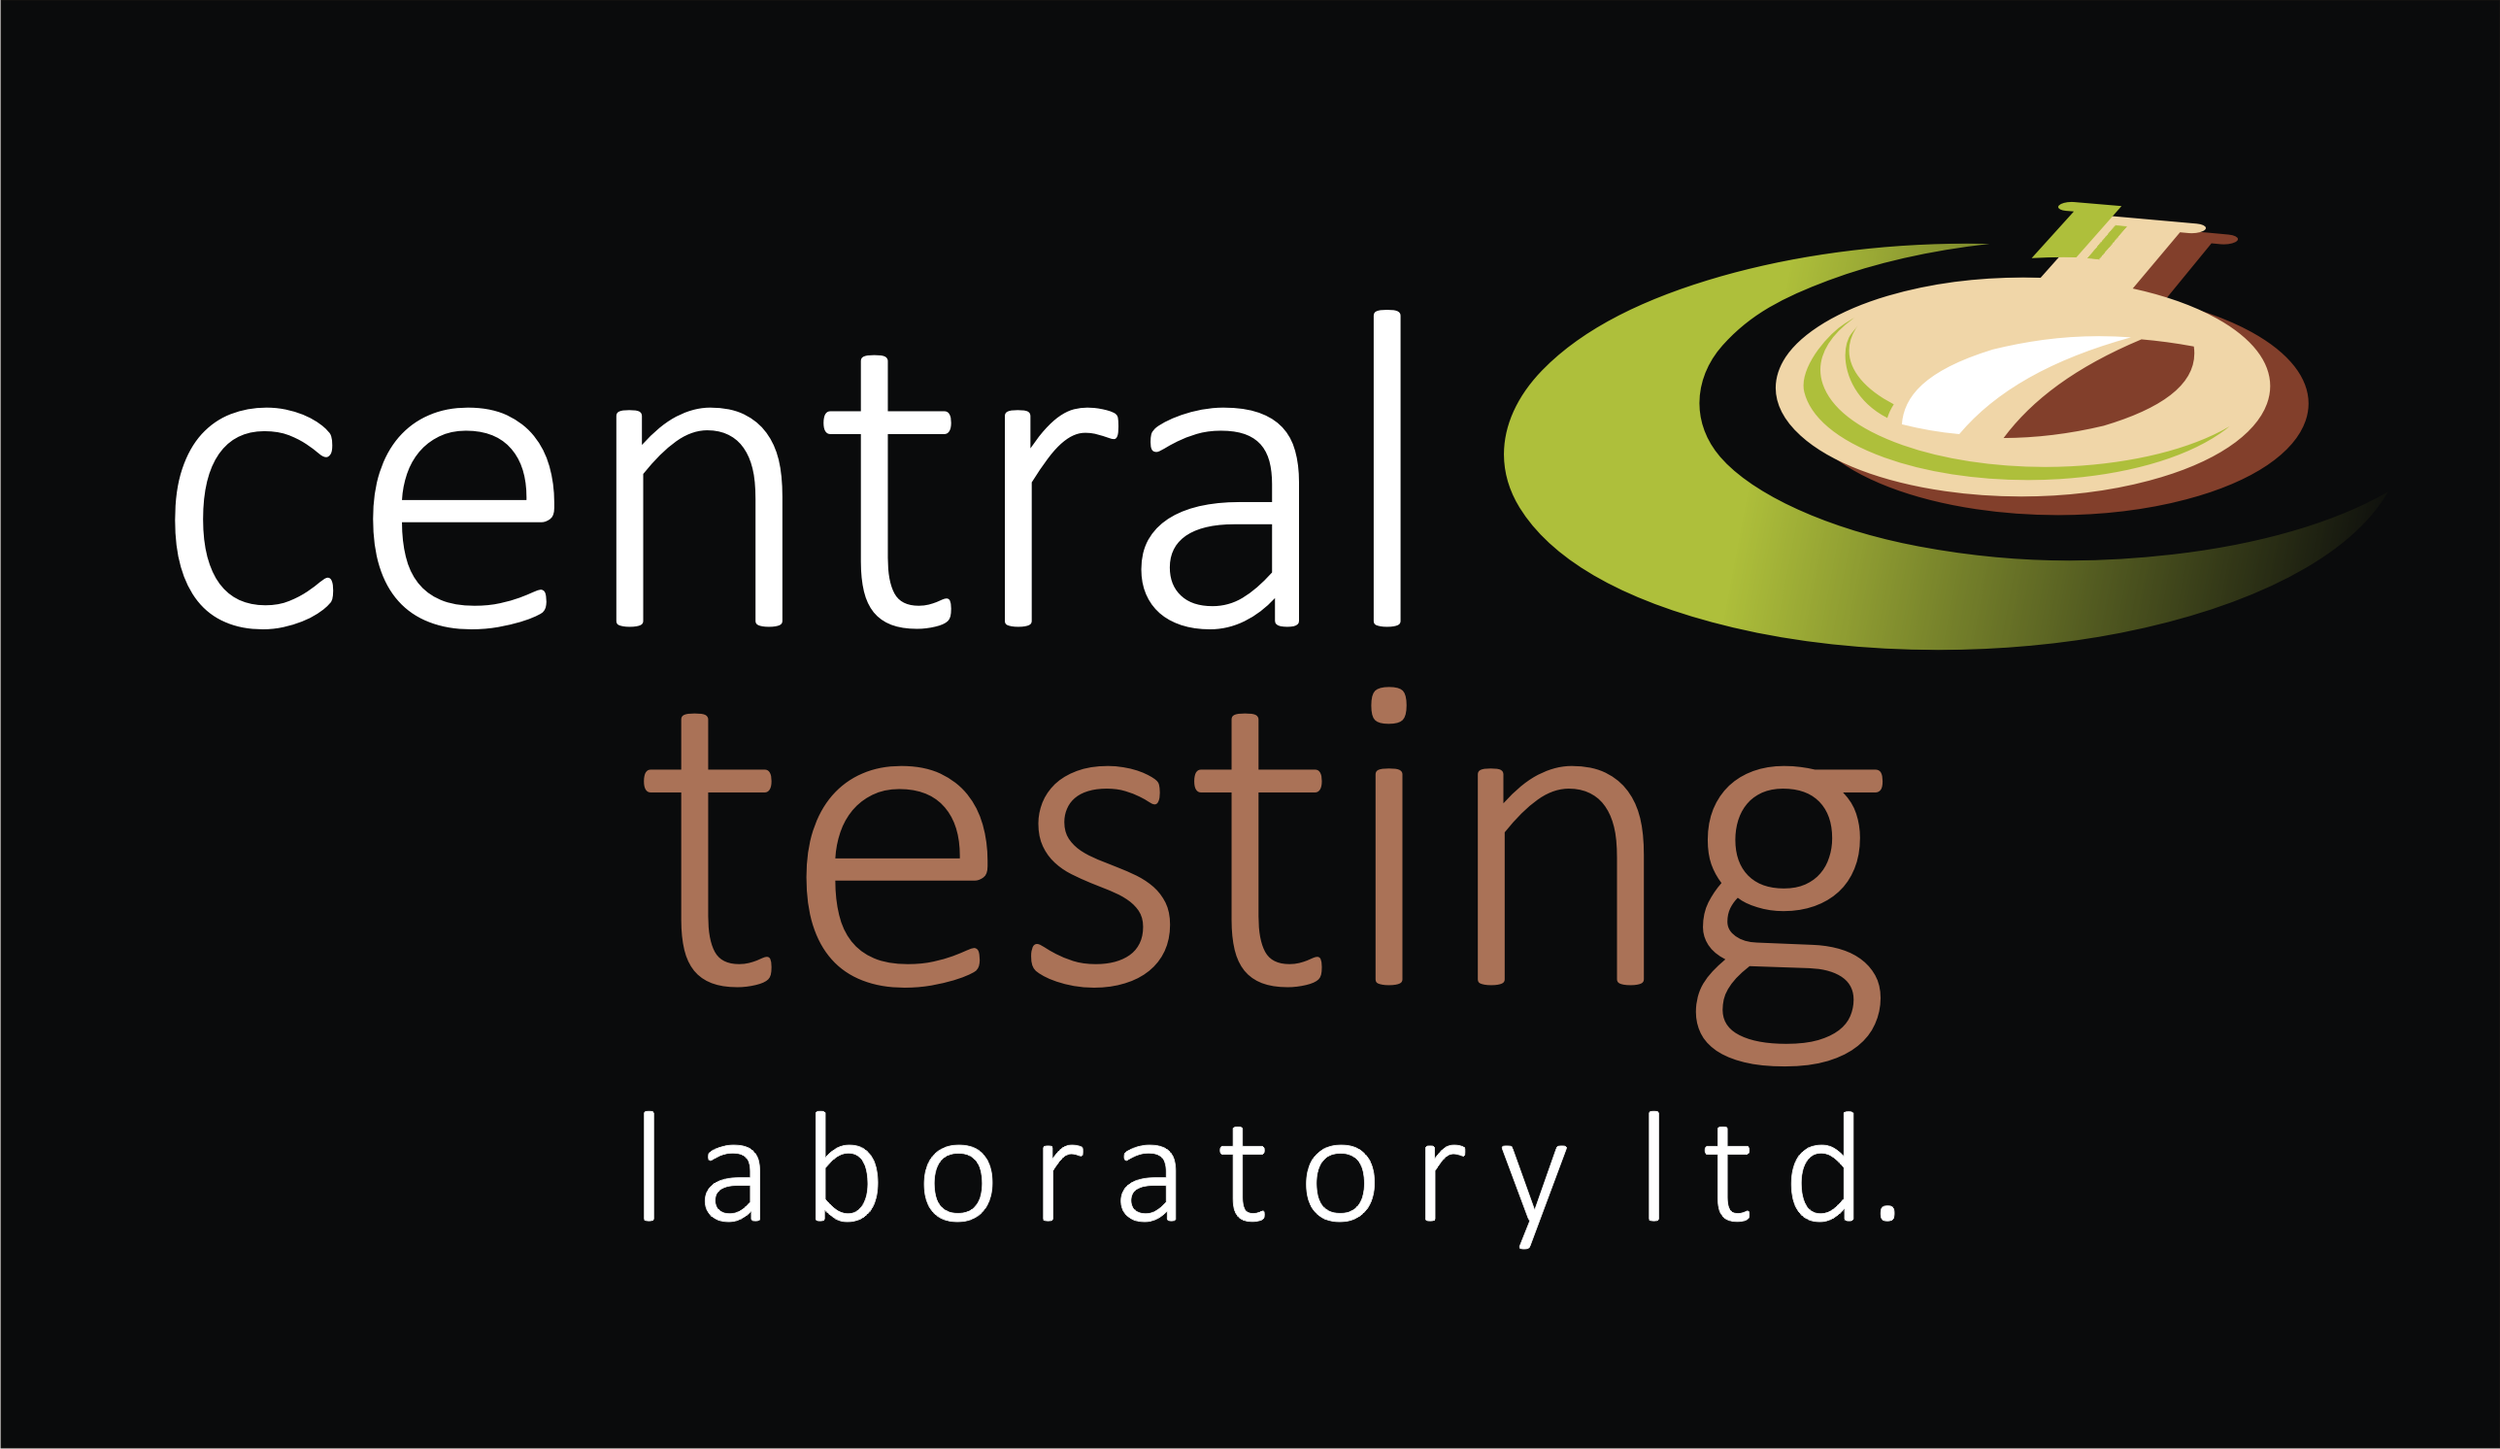 Central Testing Laboratory Limited